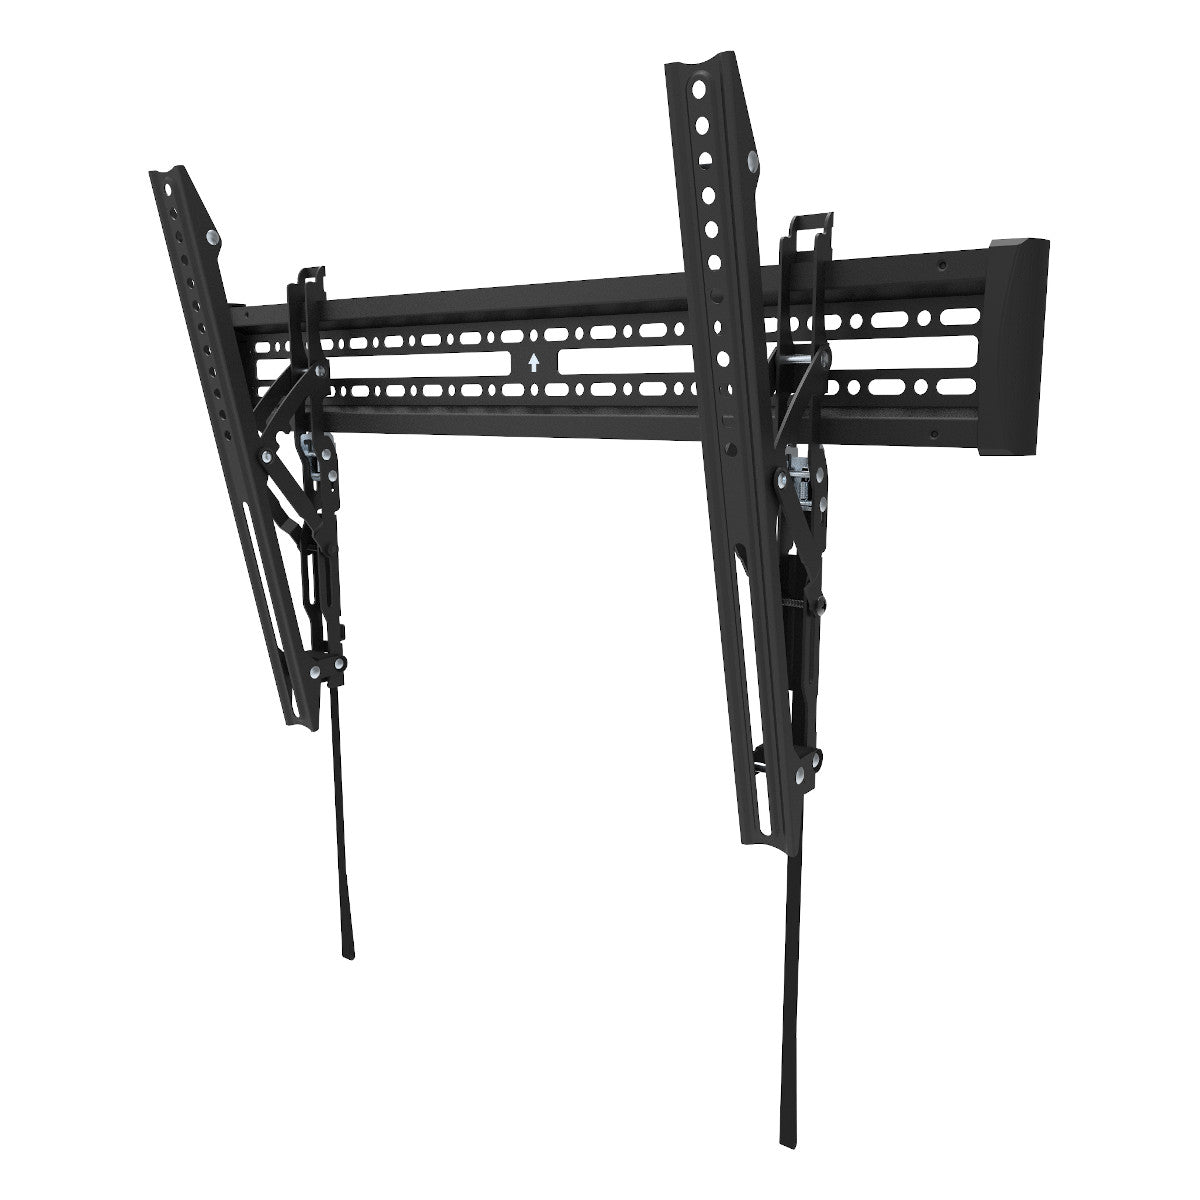 Kanto KT3260 Tilting Mount for 32-inch to 60-inch TVs